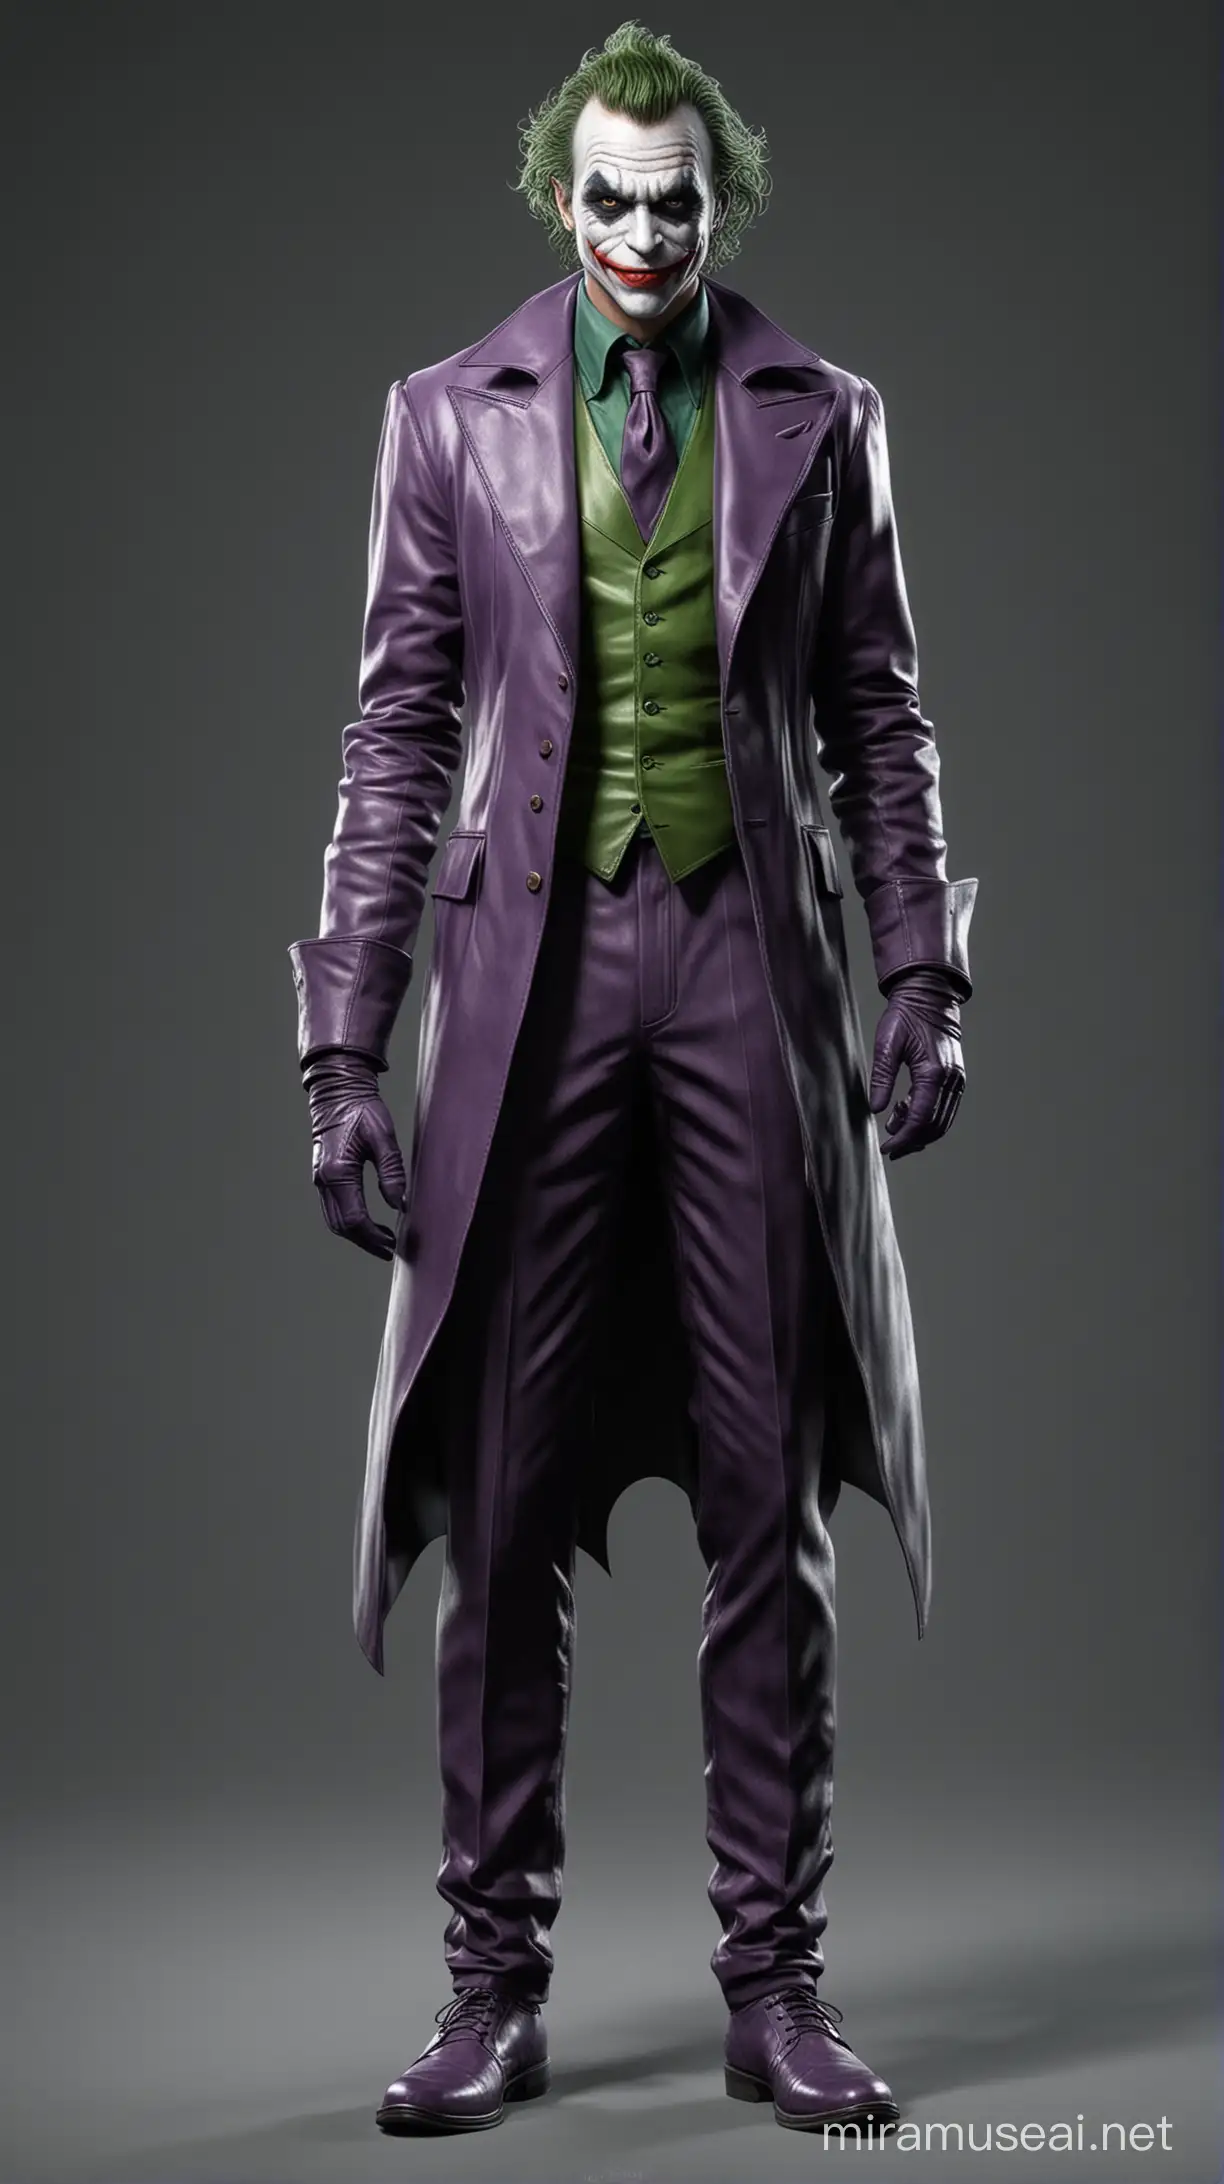 Colorful Joker Character Standing with Menacing Grin